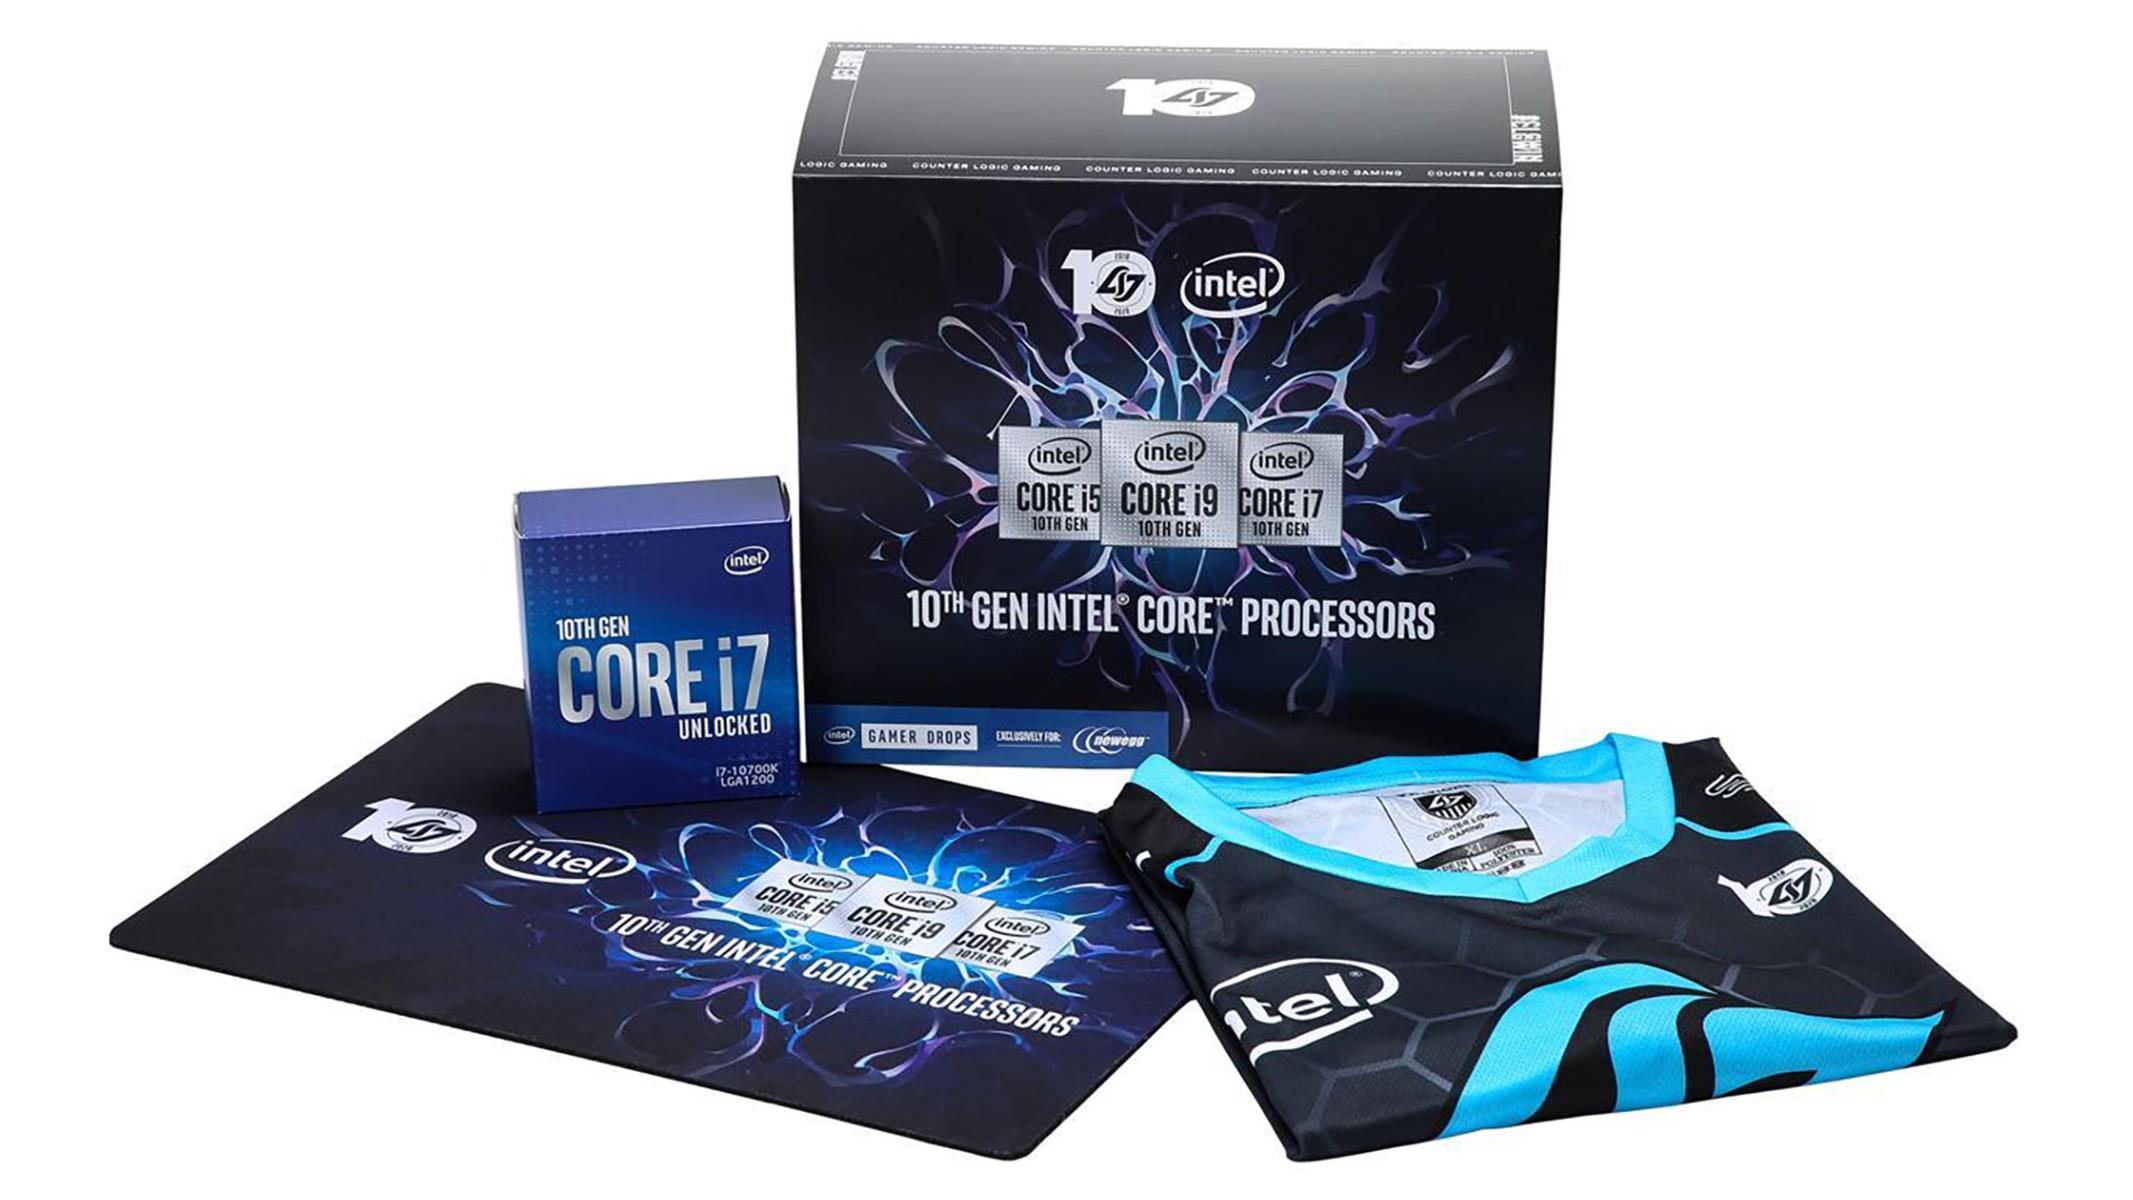 Intel Core i7-10700K Bundle Is A Hot Deal And Cheaper Than Buying